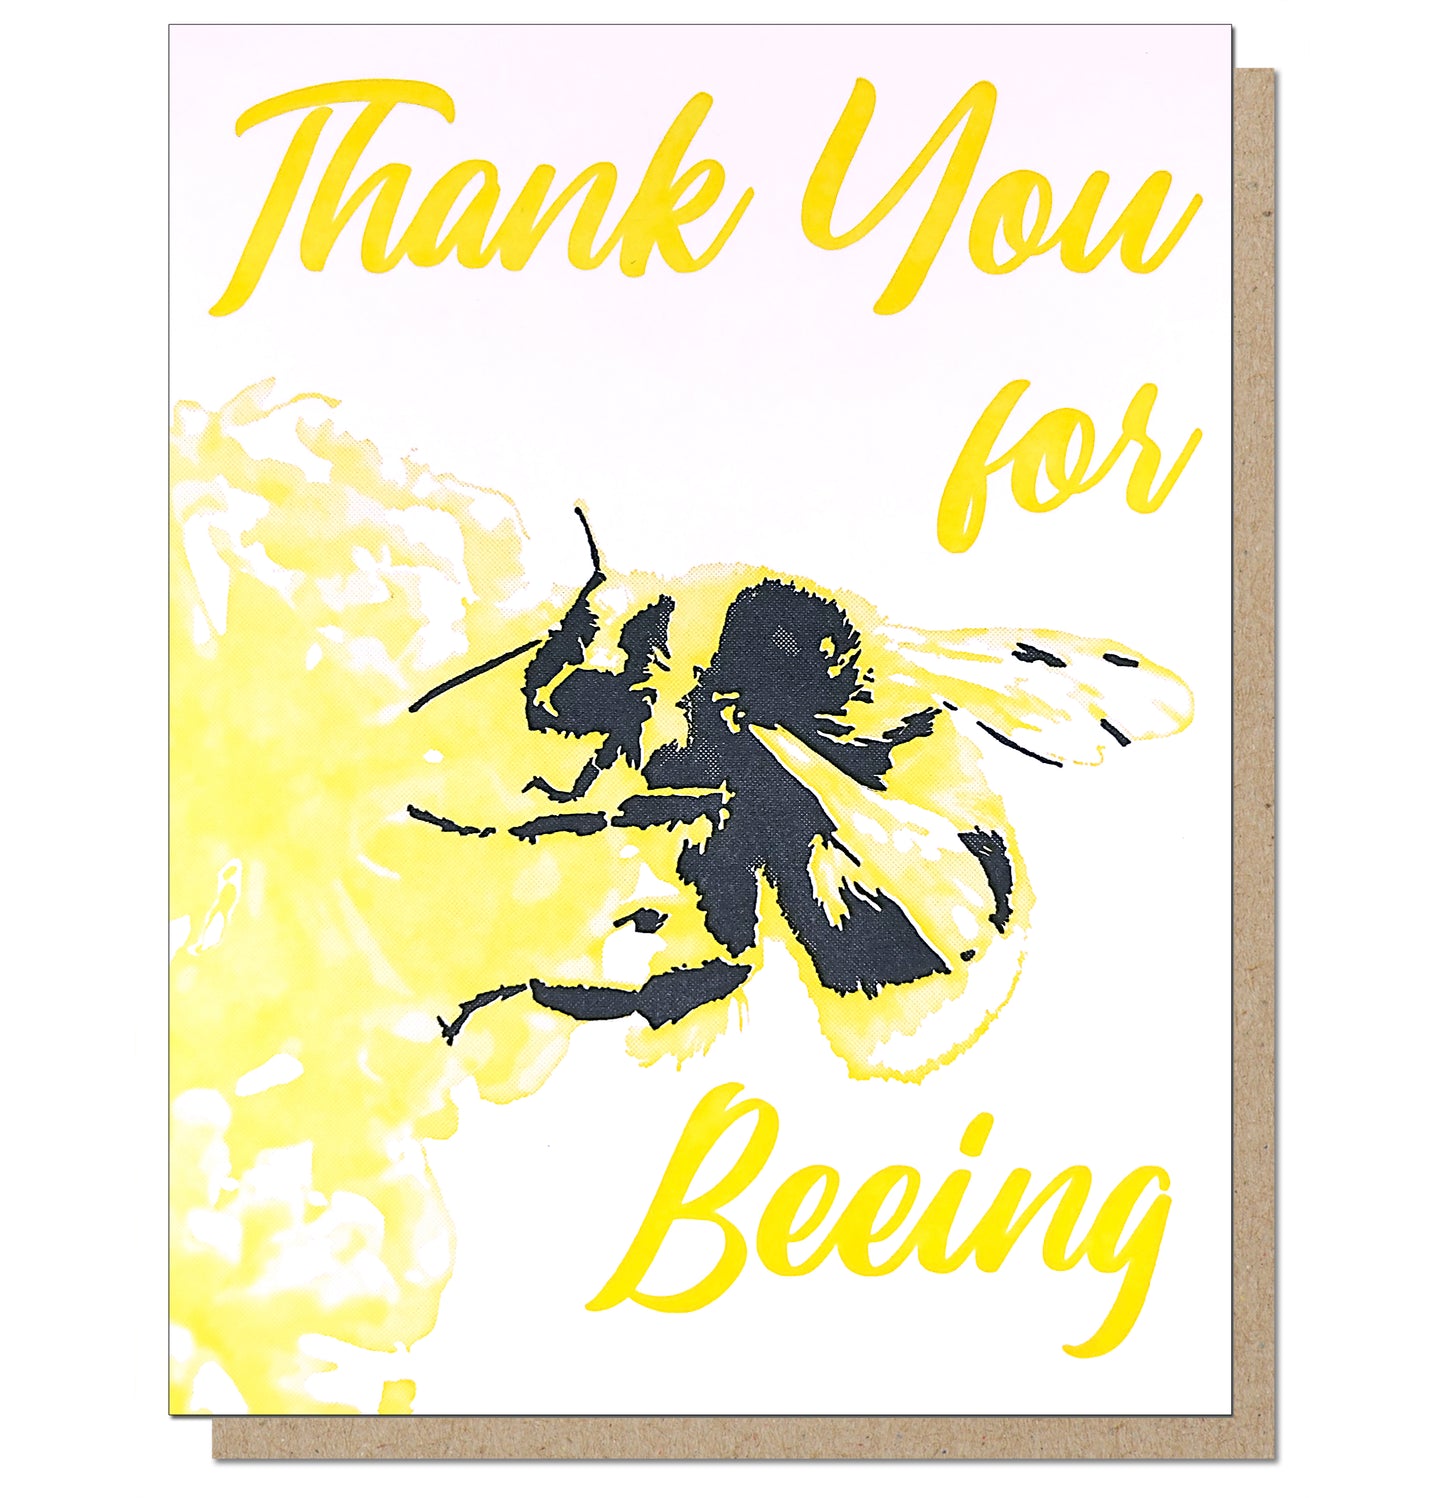 Thank you for Beeing - Romantic Letterpress Love Greeting Card